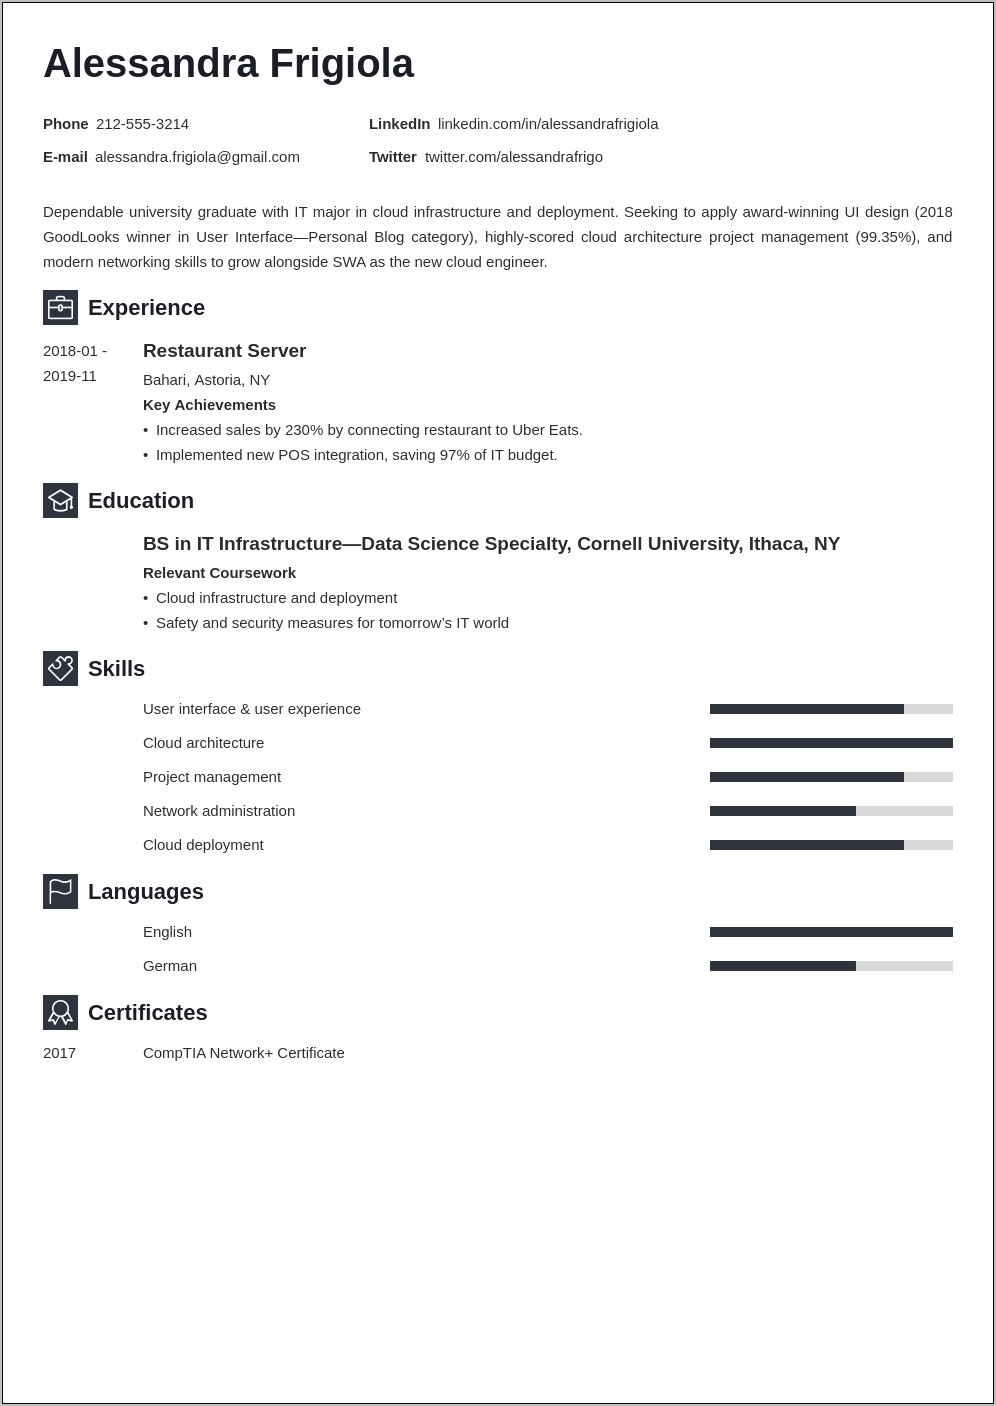 Resume Objective Examples Entry Level Customer Service